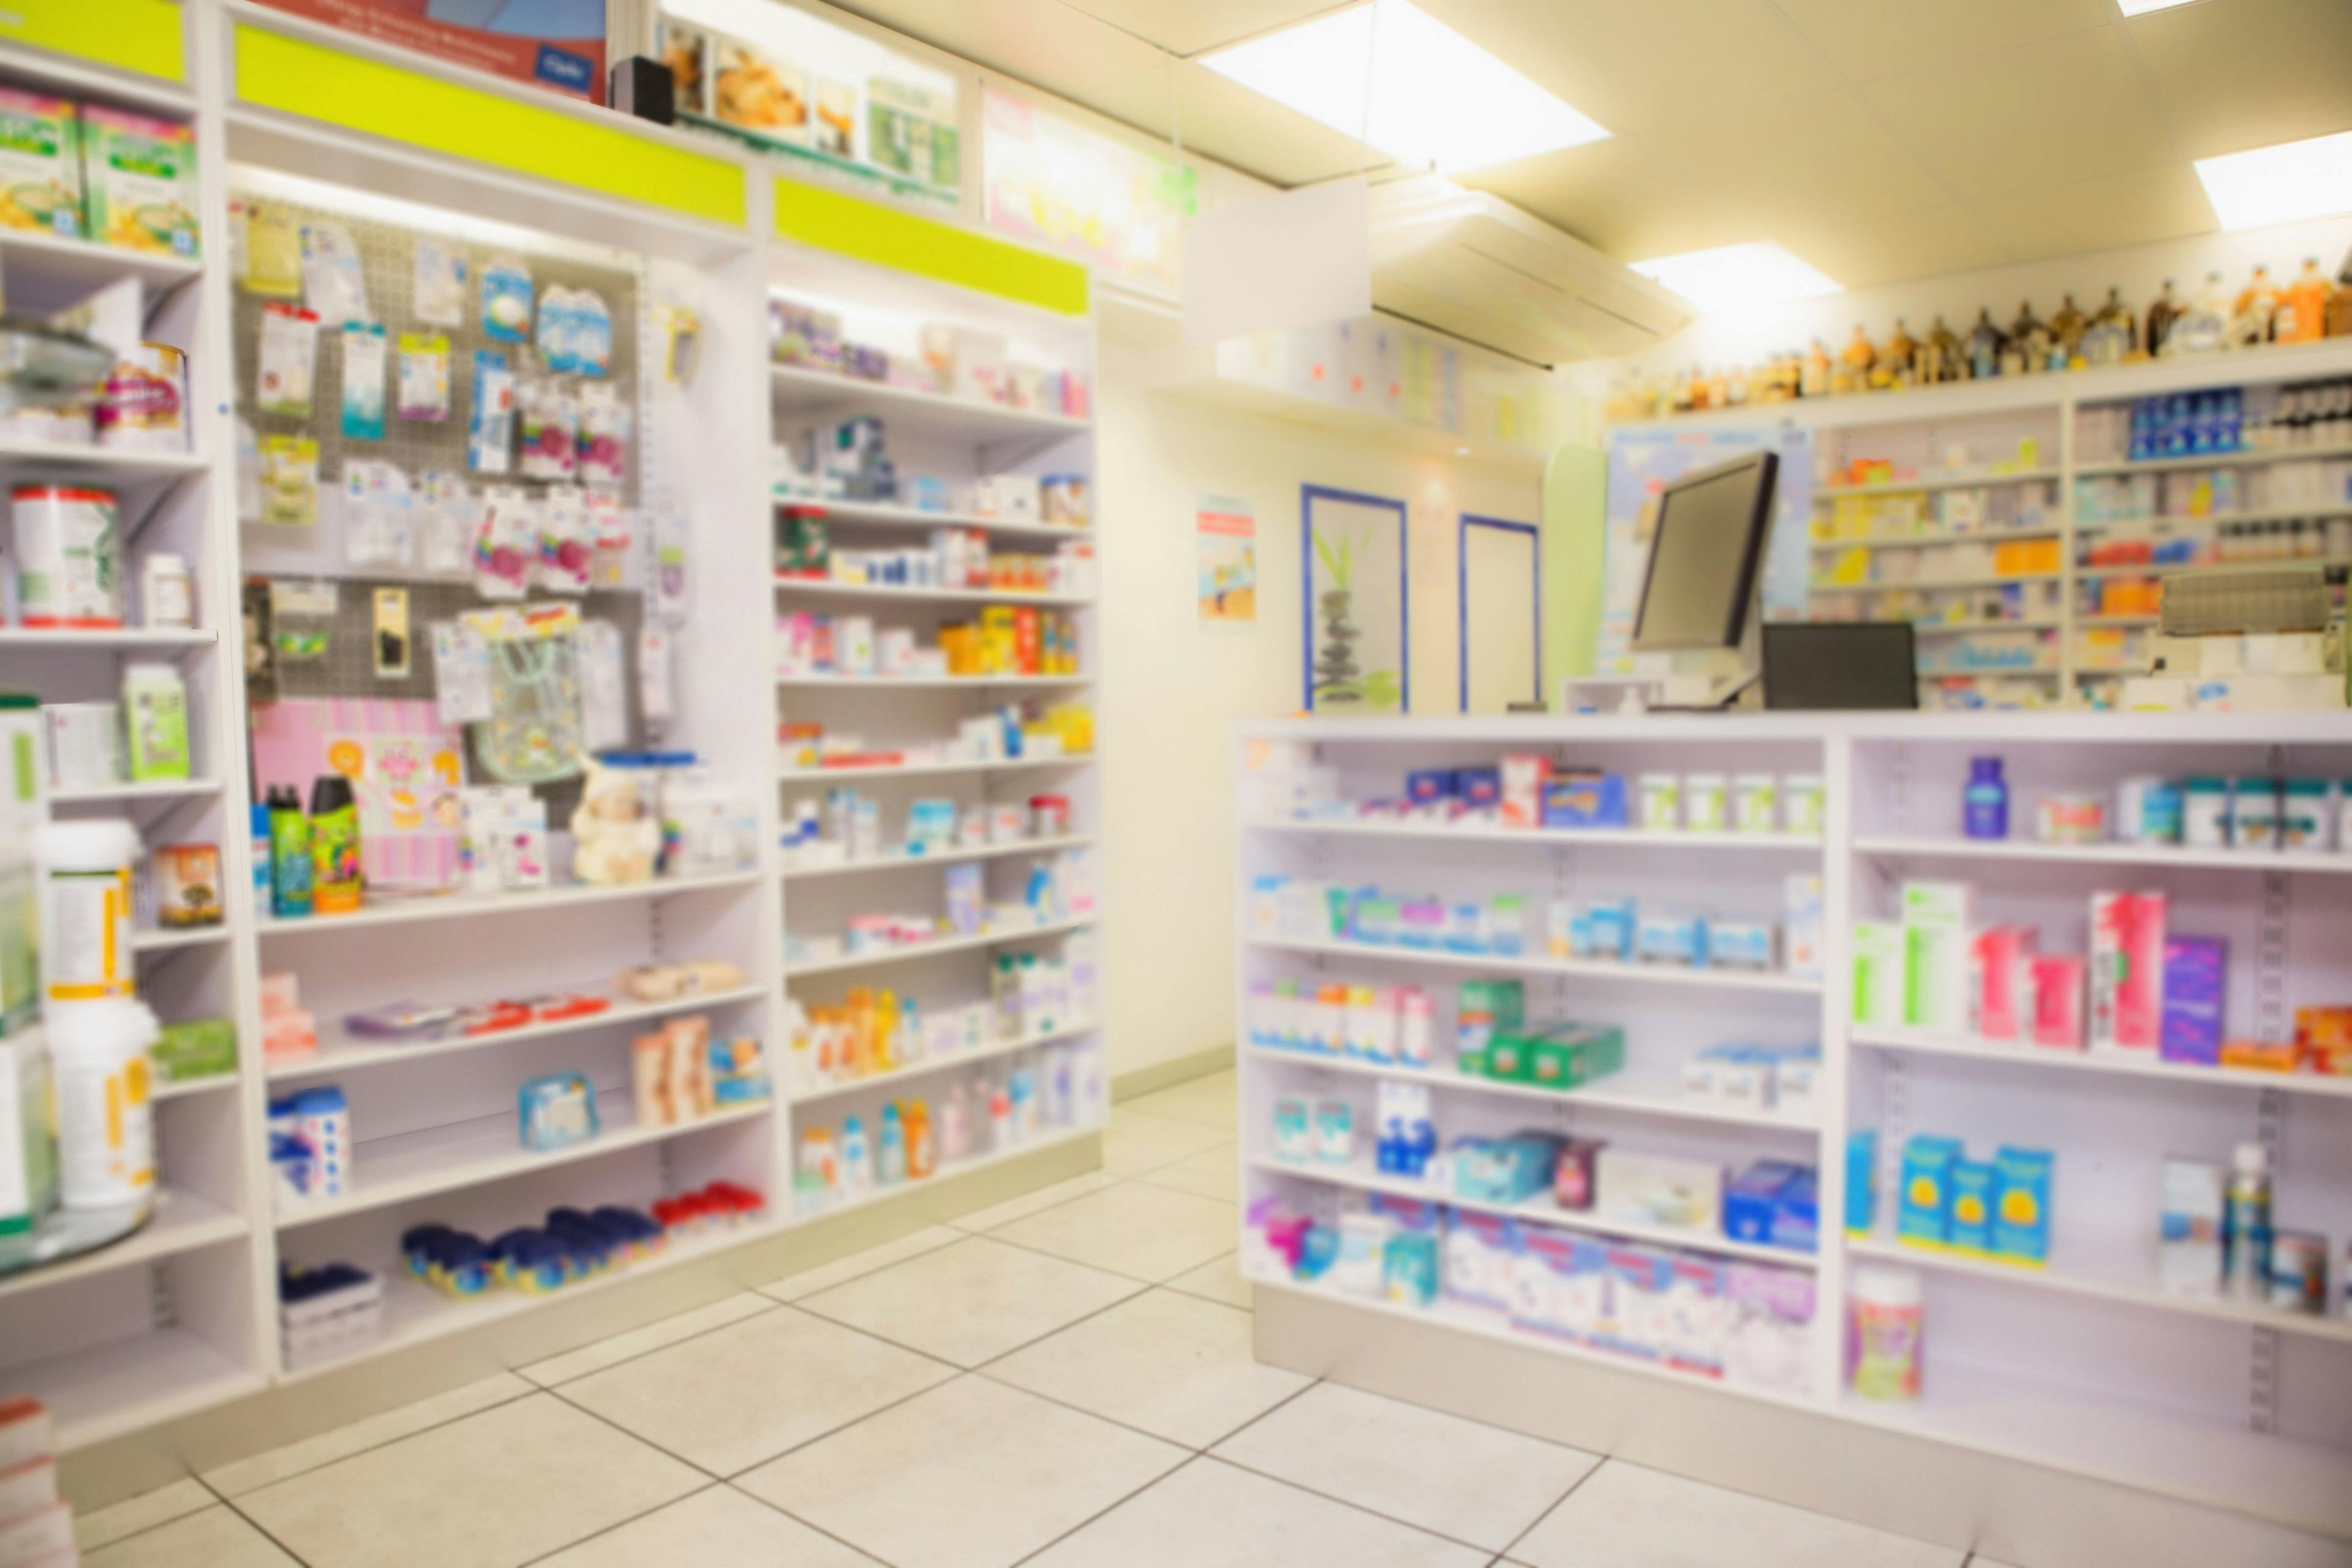 NCPA CEO: Three-Quarters of Community Pharmacists Say Filling Open Positions Remains Difficult